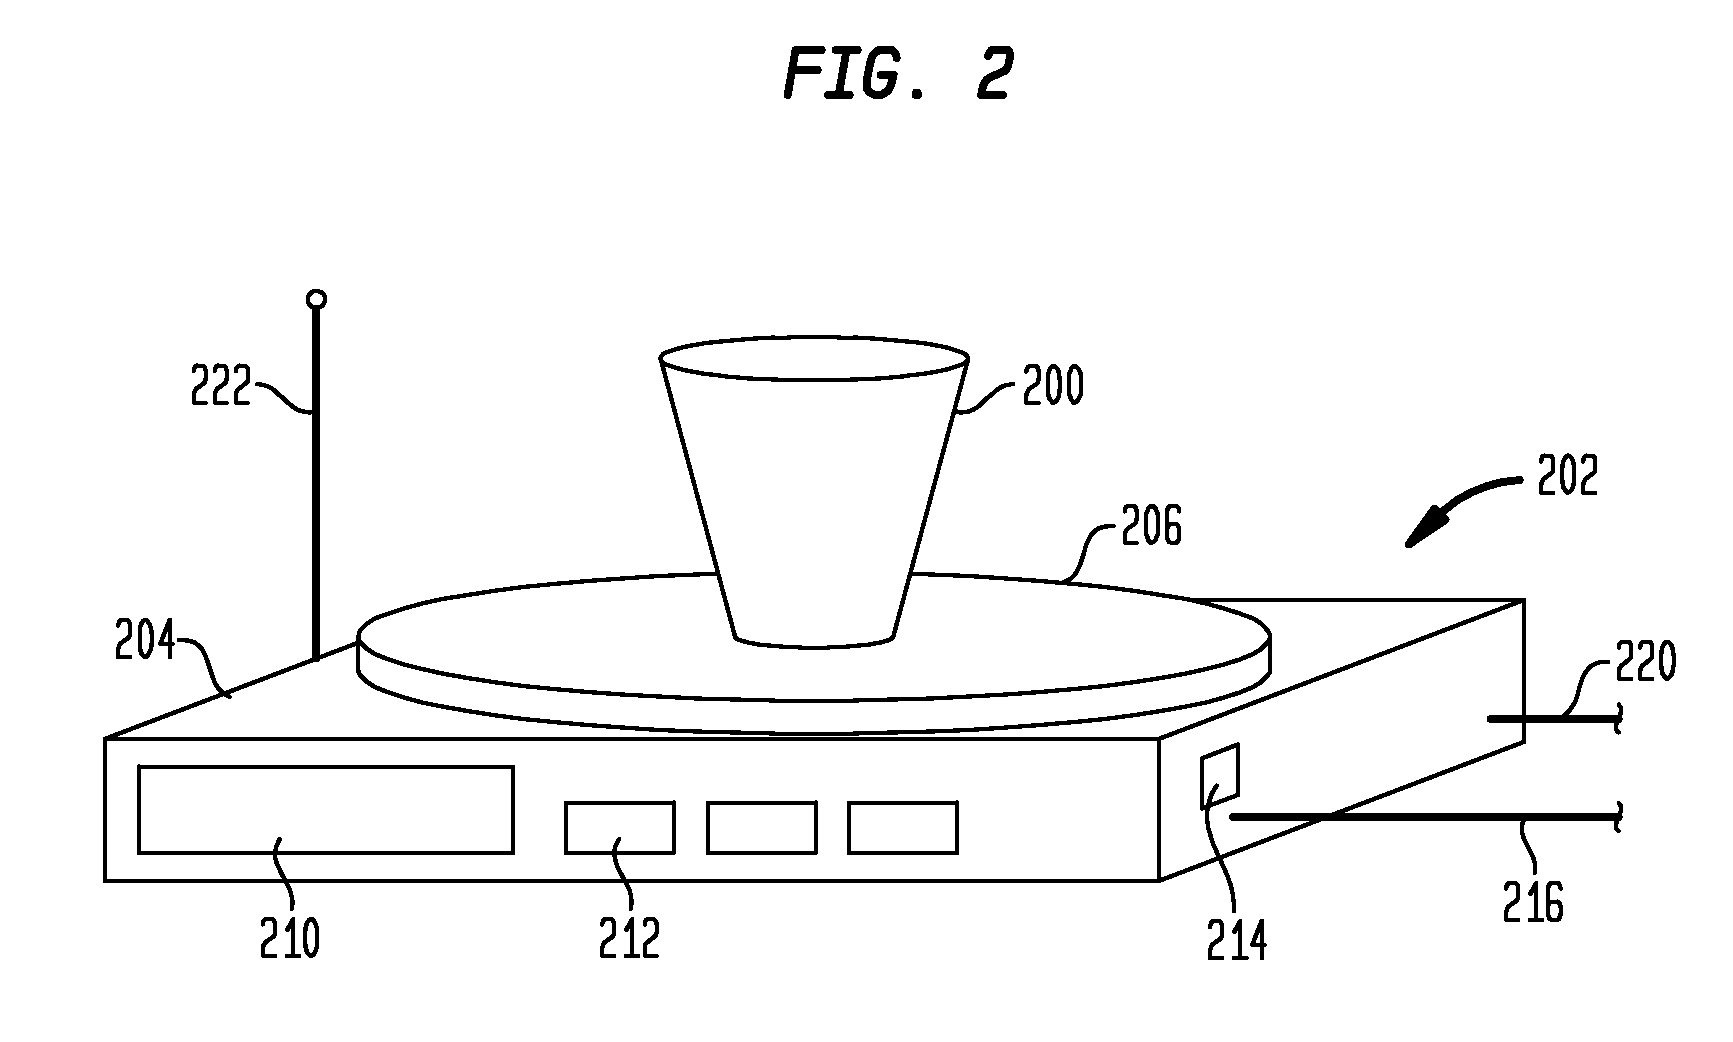 System and Method Using a Scale for Monitoring the Dispensing of a Beverage